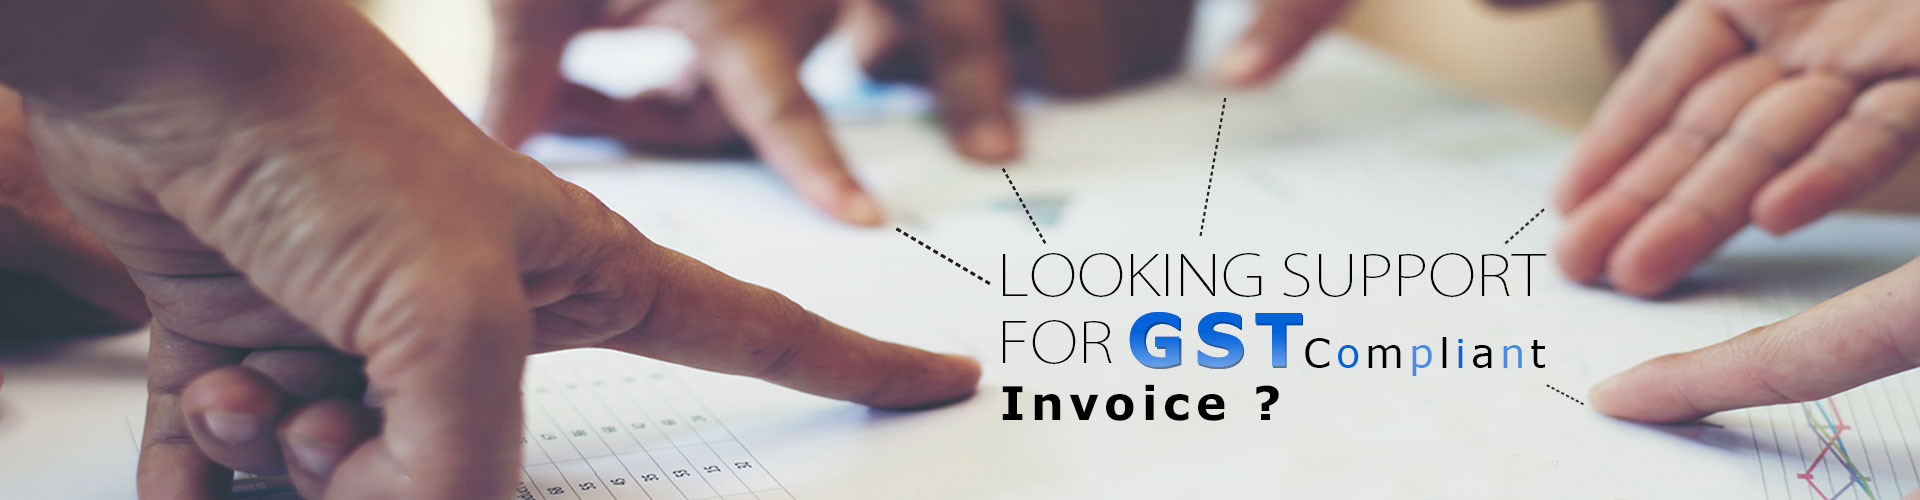 Looking Support For GST Compliant Invoice?